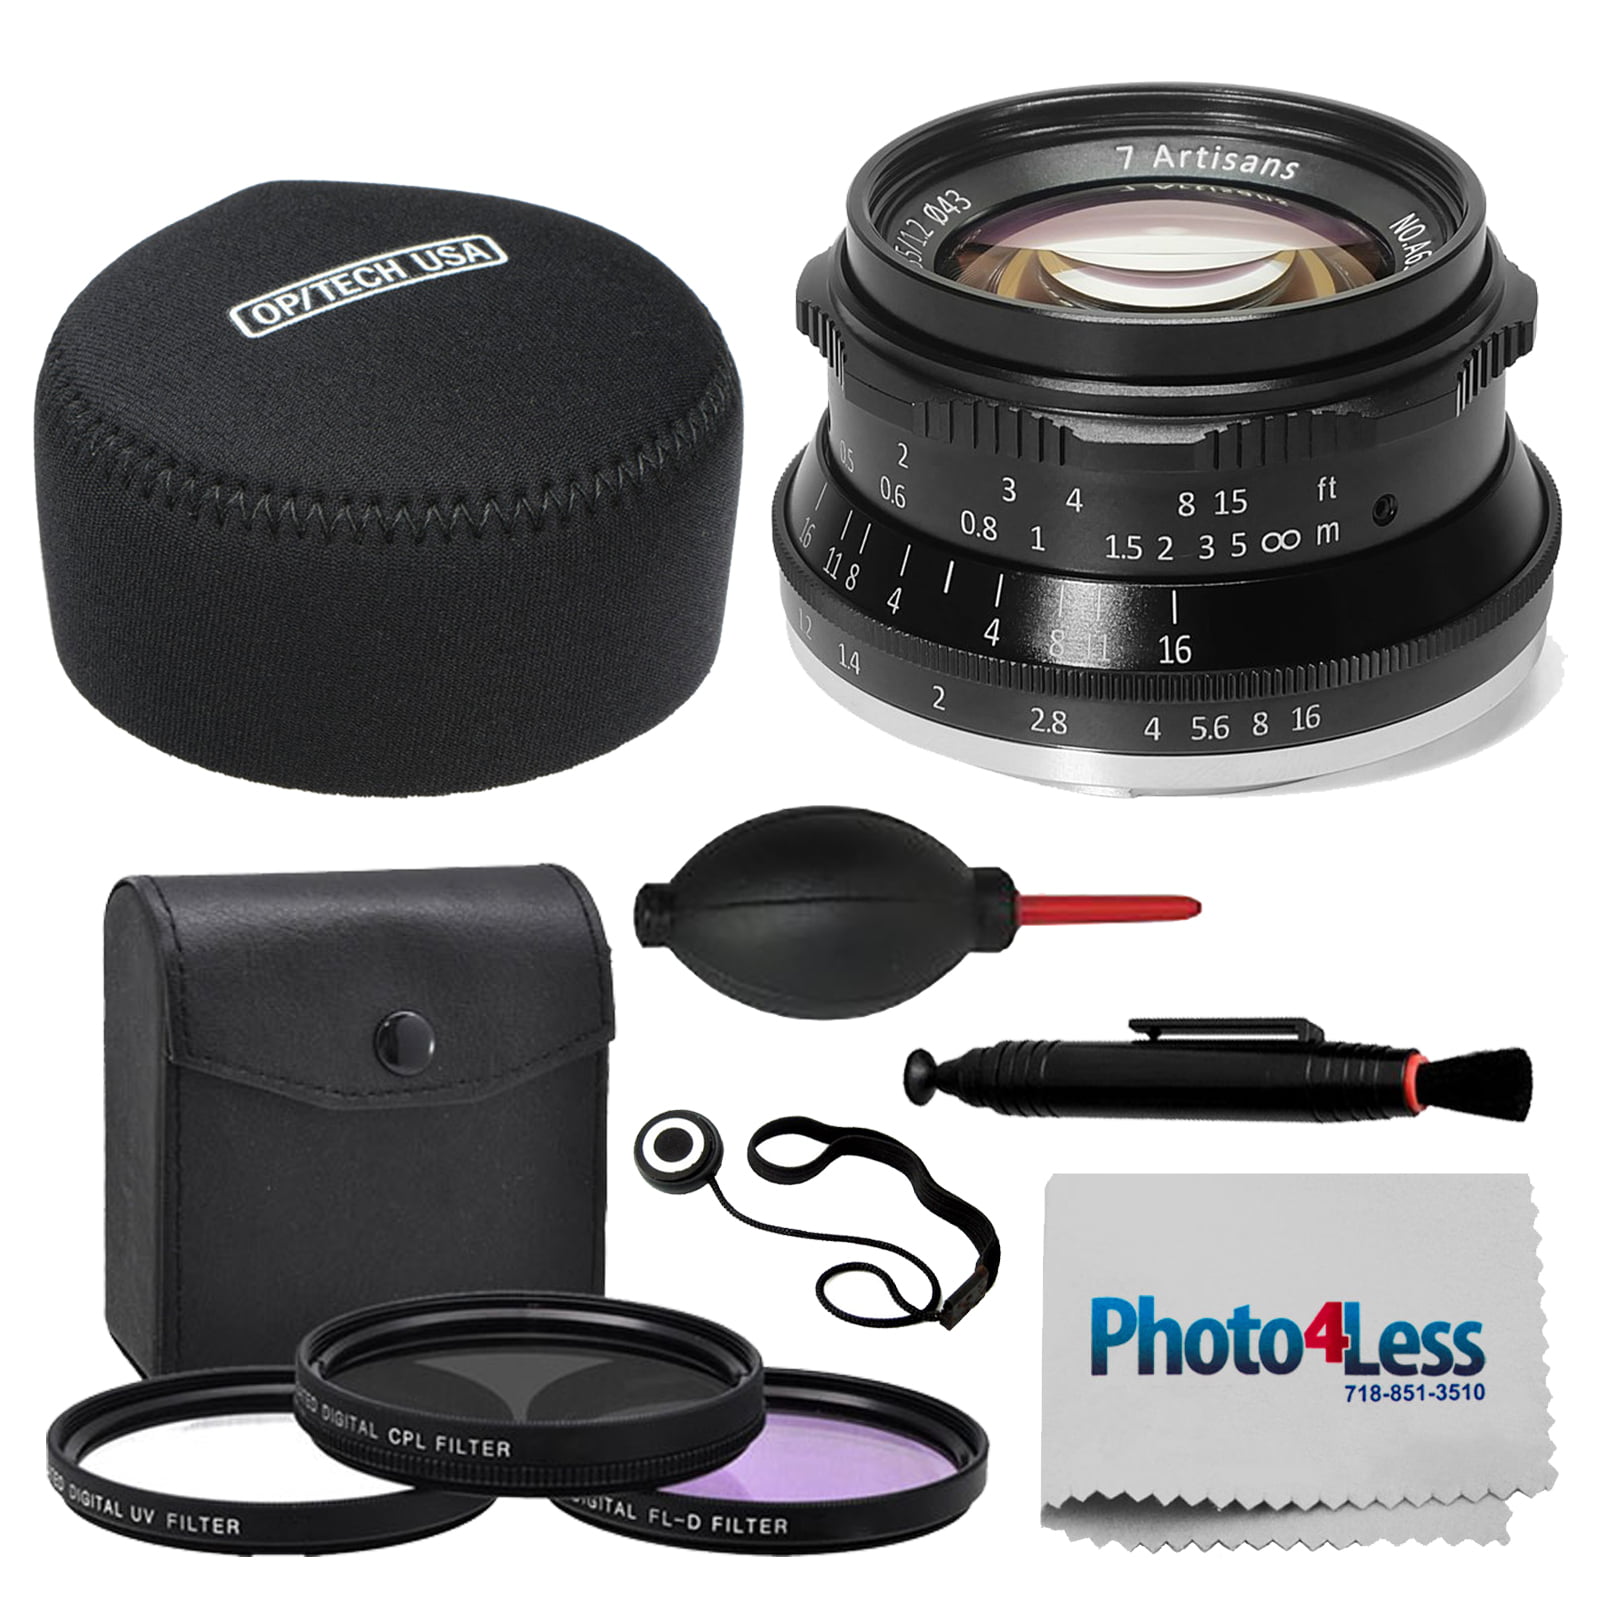 Pouch 7artisans 35mm f1.2 Large Aperture Manual Lens for Sony E-mount Cameras 